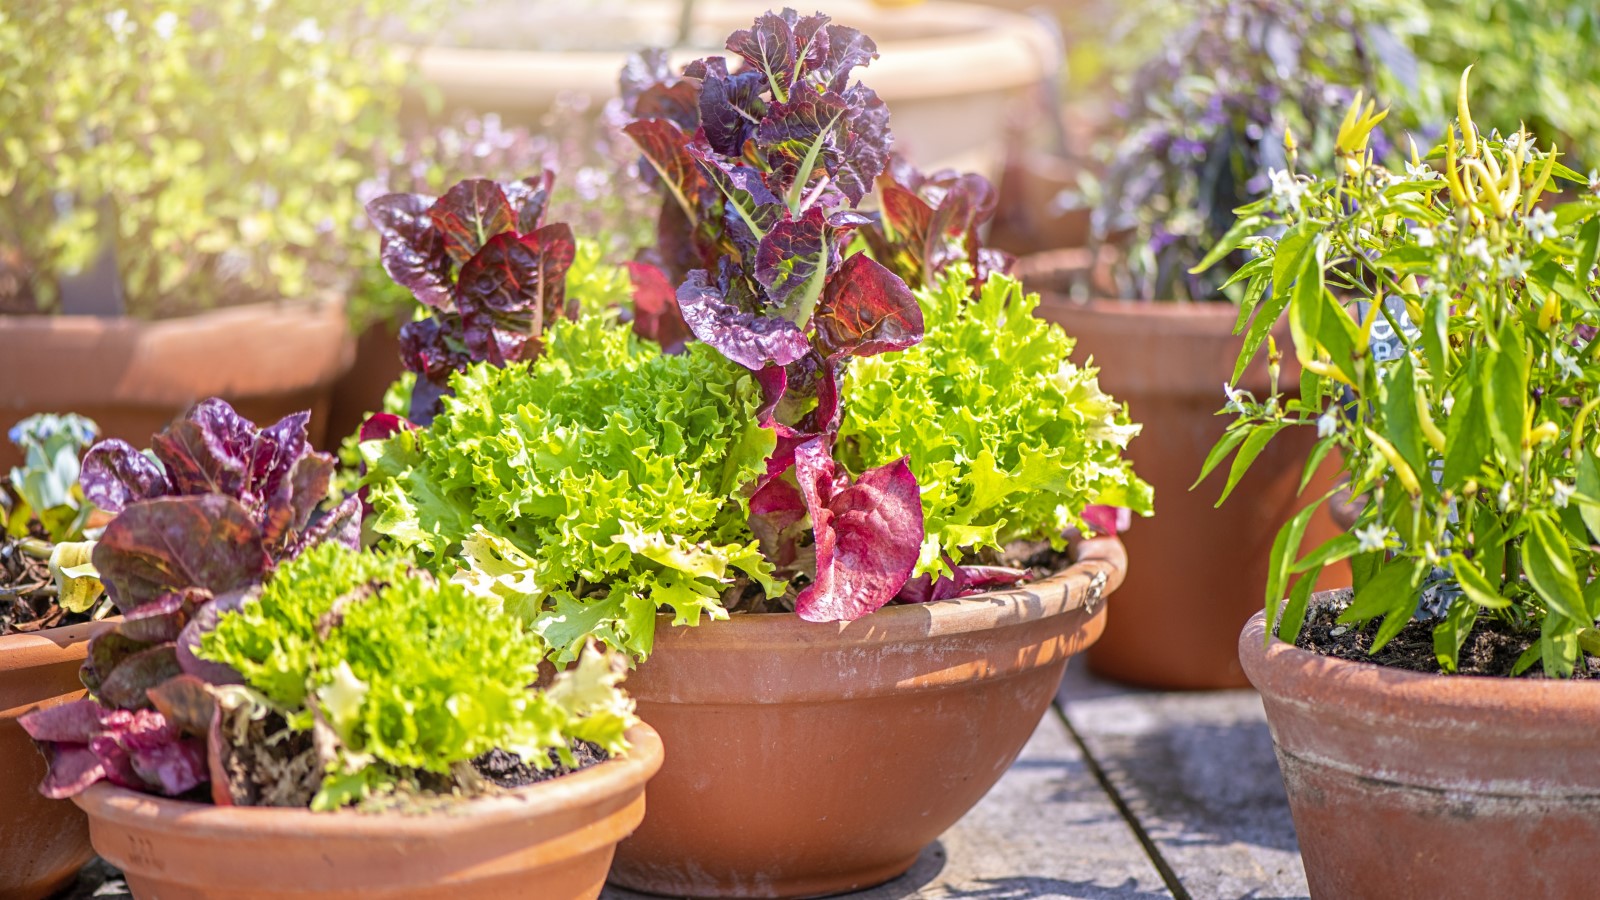 You can grow winter vegetables in containers